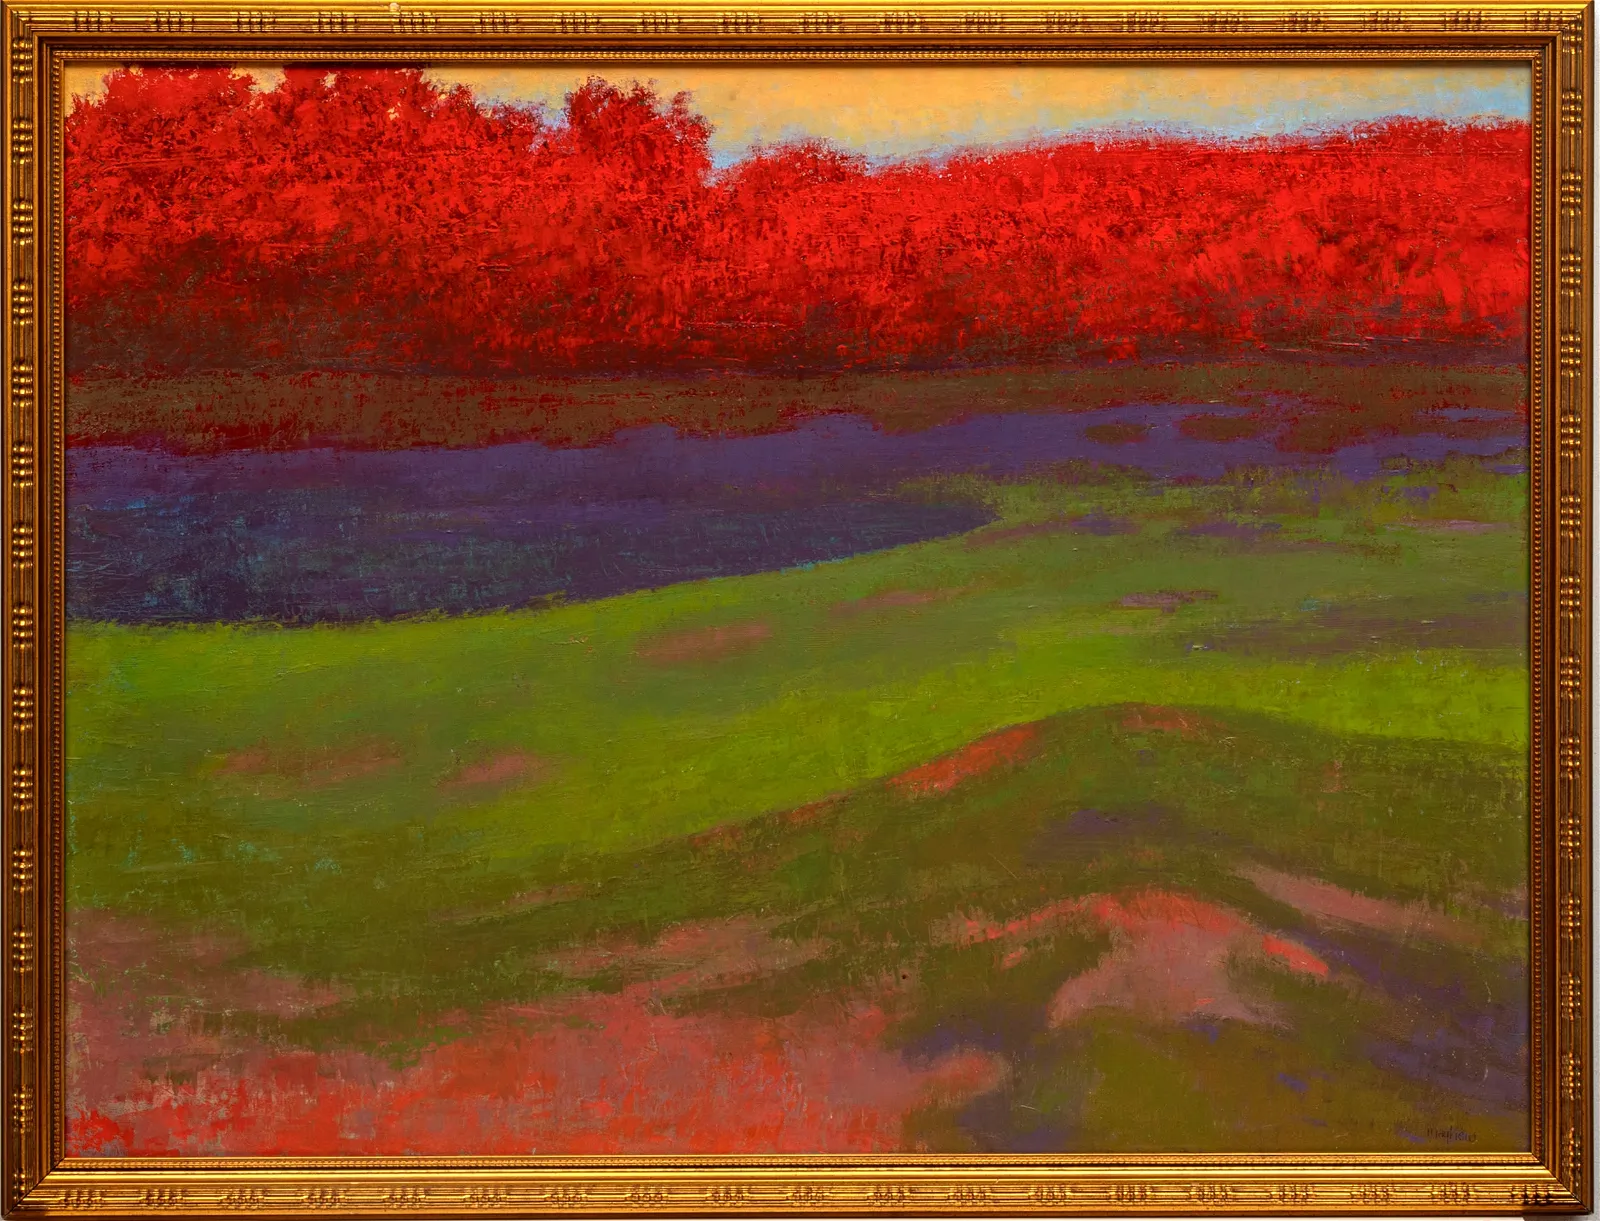 Two Richard Mayhew landscapes together brought almost $600K at DuMouchelles